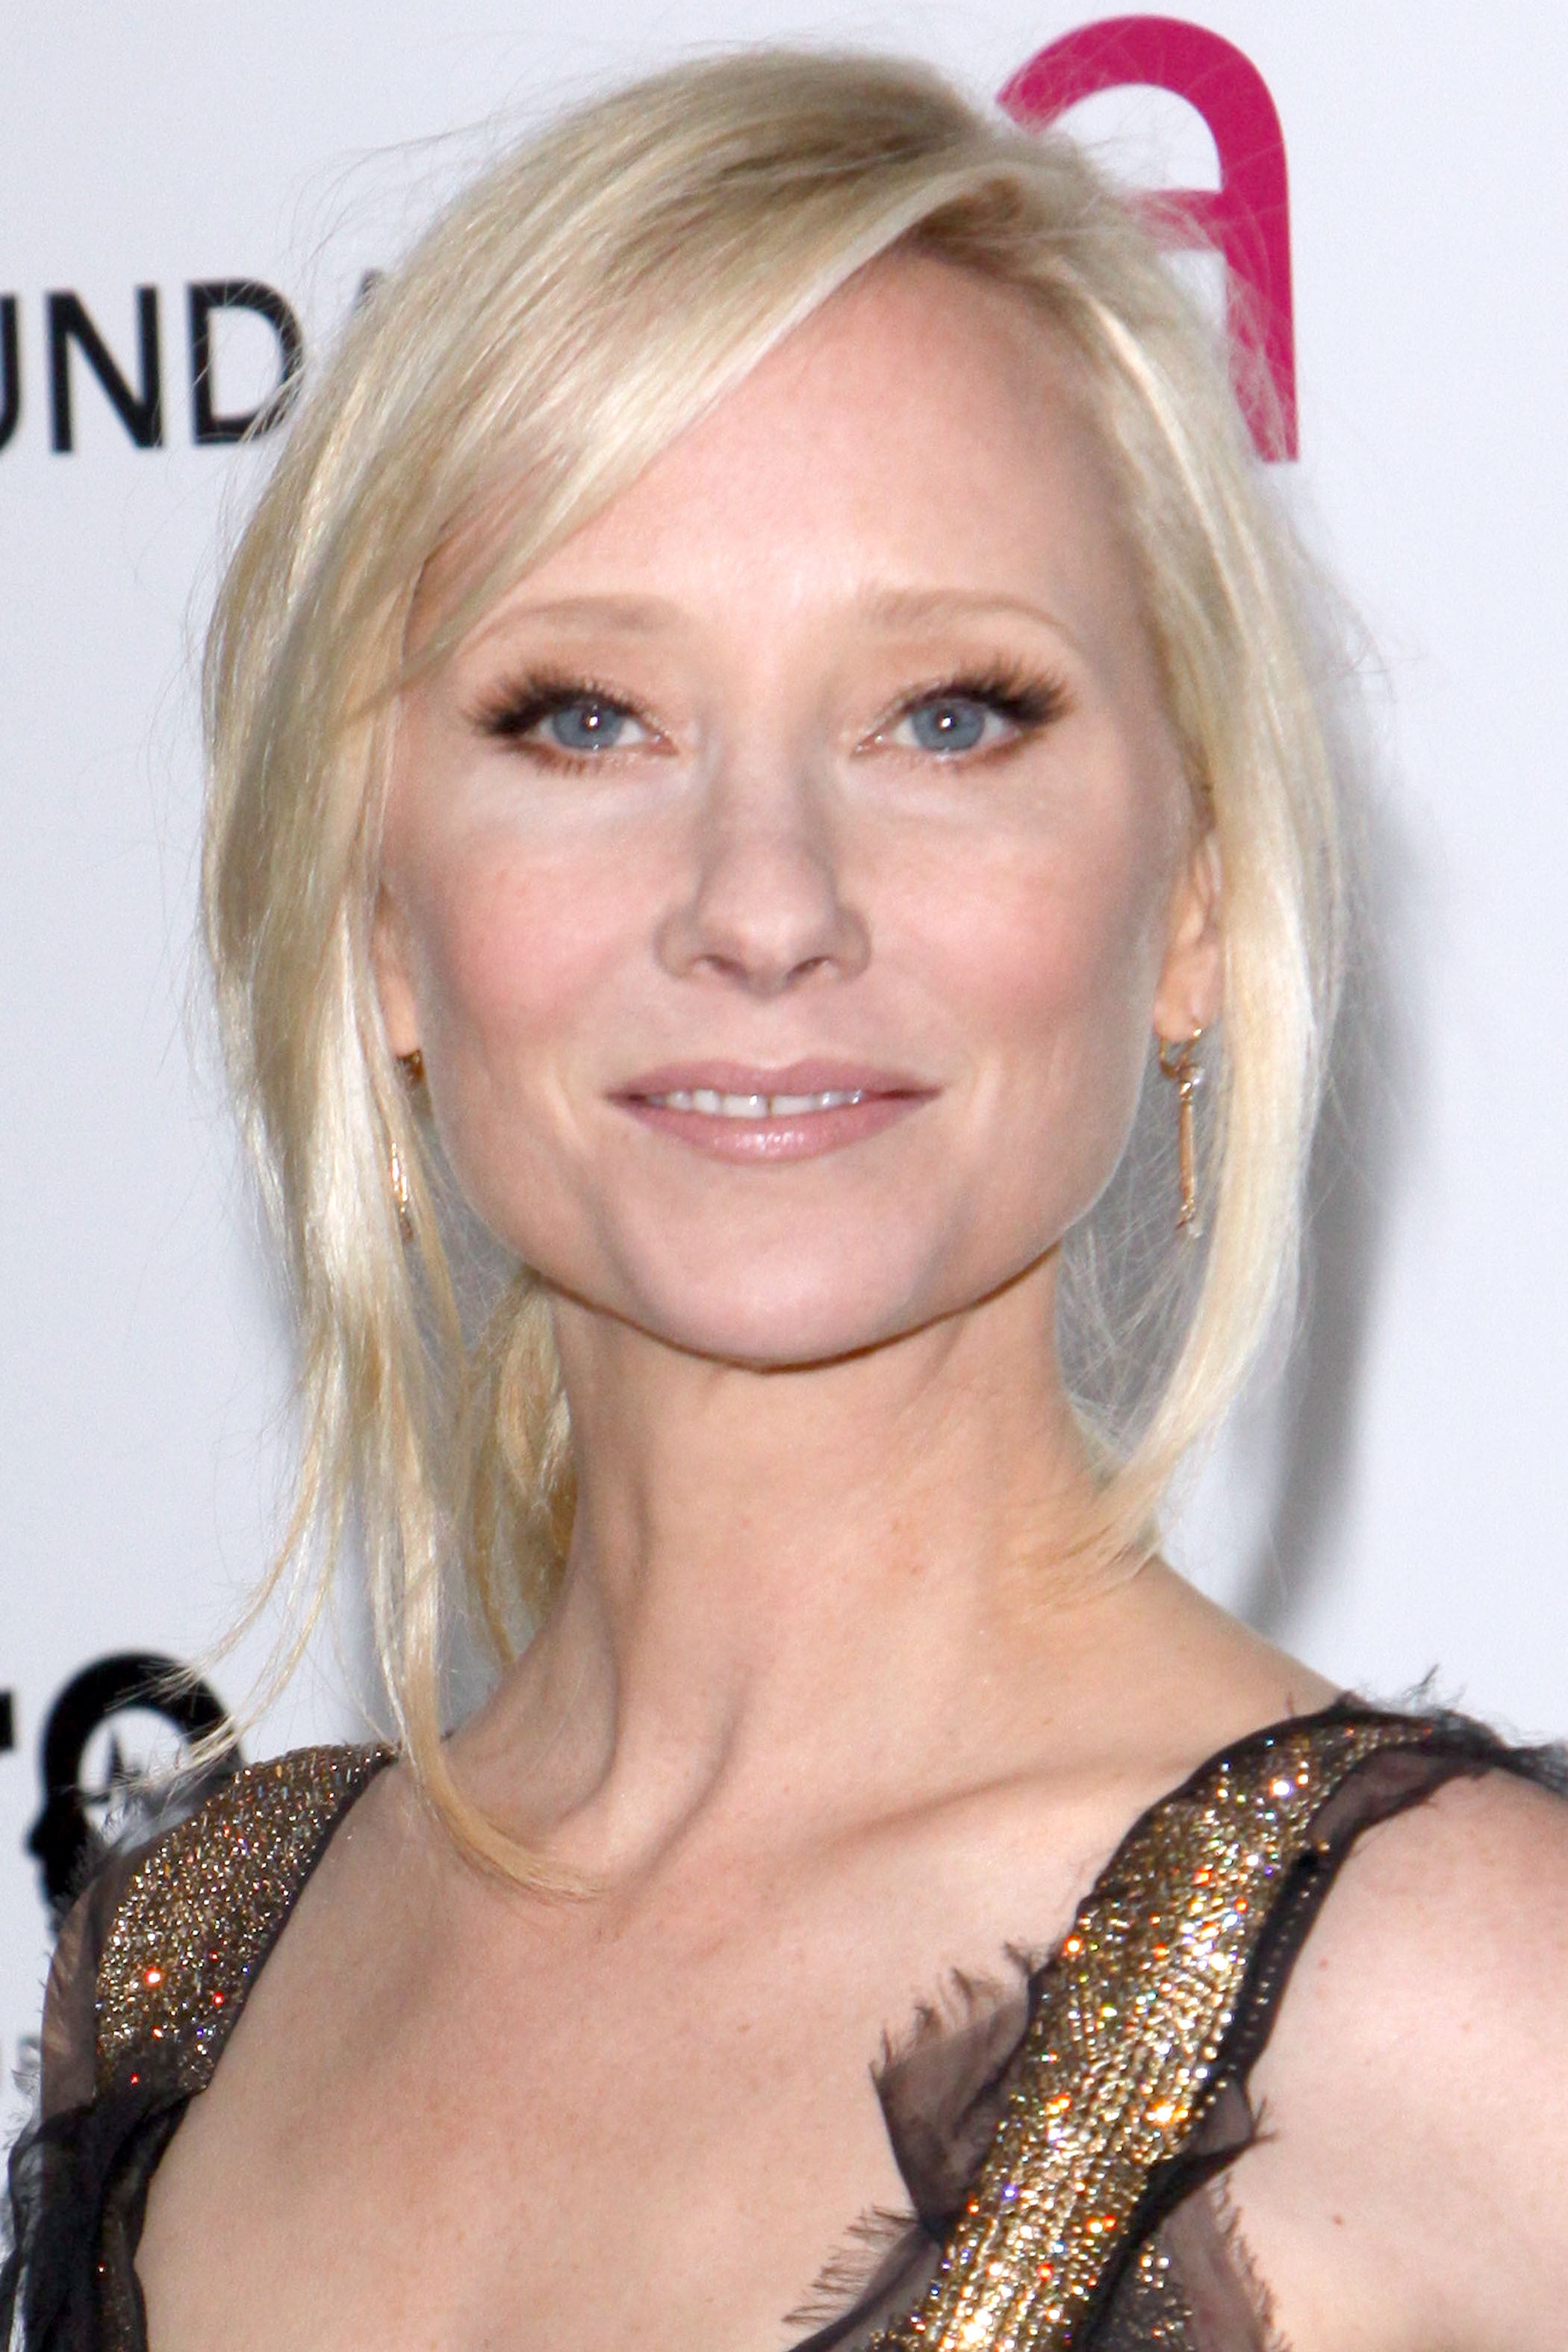 Anne Heche to be laid to rest ‘among her peers’ at Hollywood Forever Cemetery (Tony Di Maio/PA)